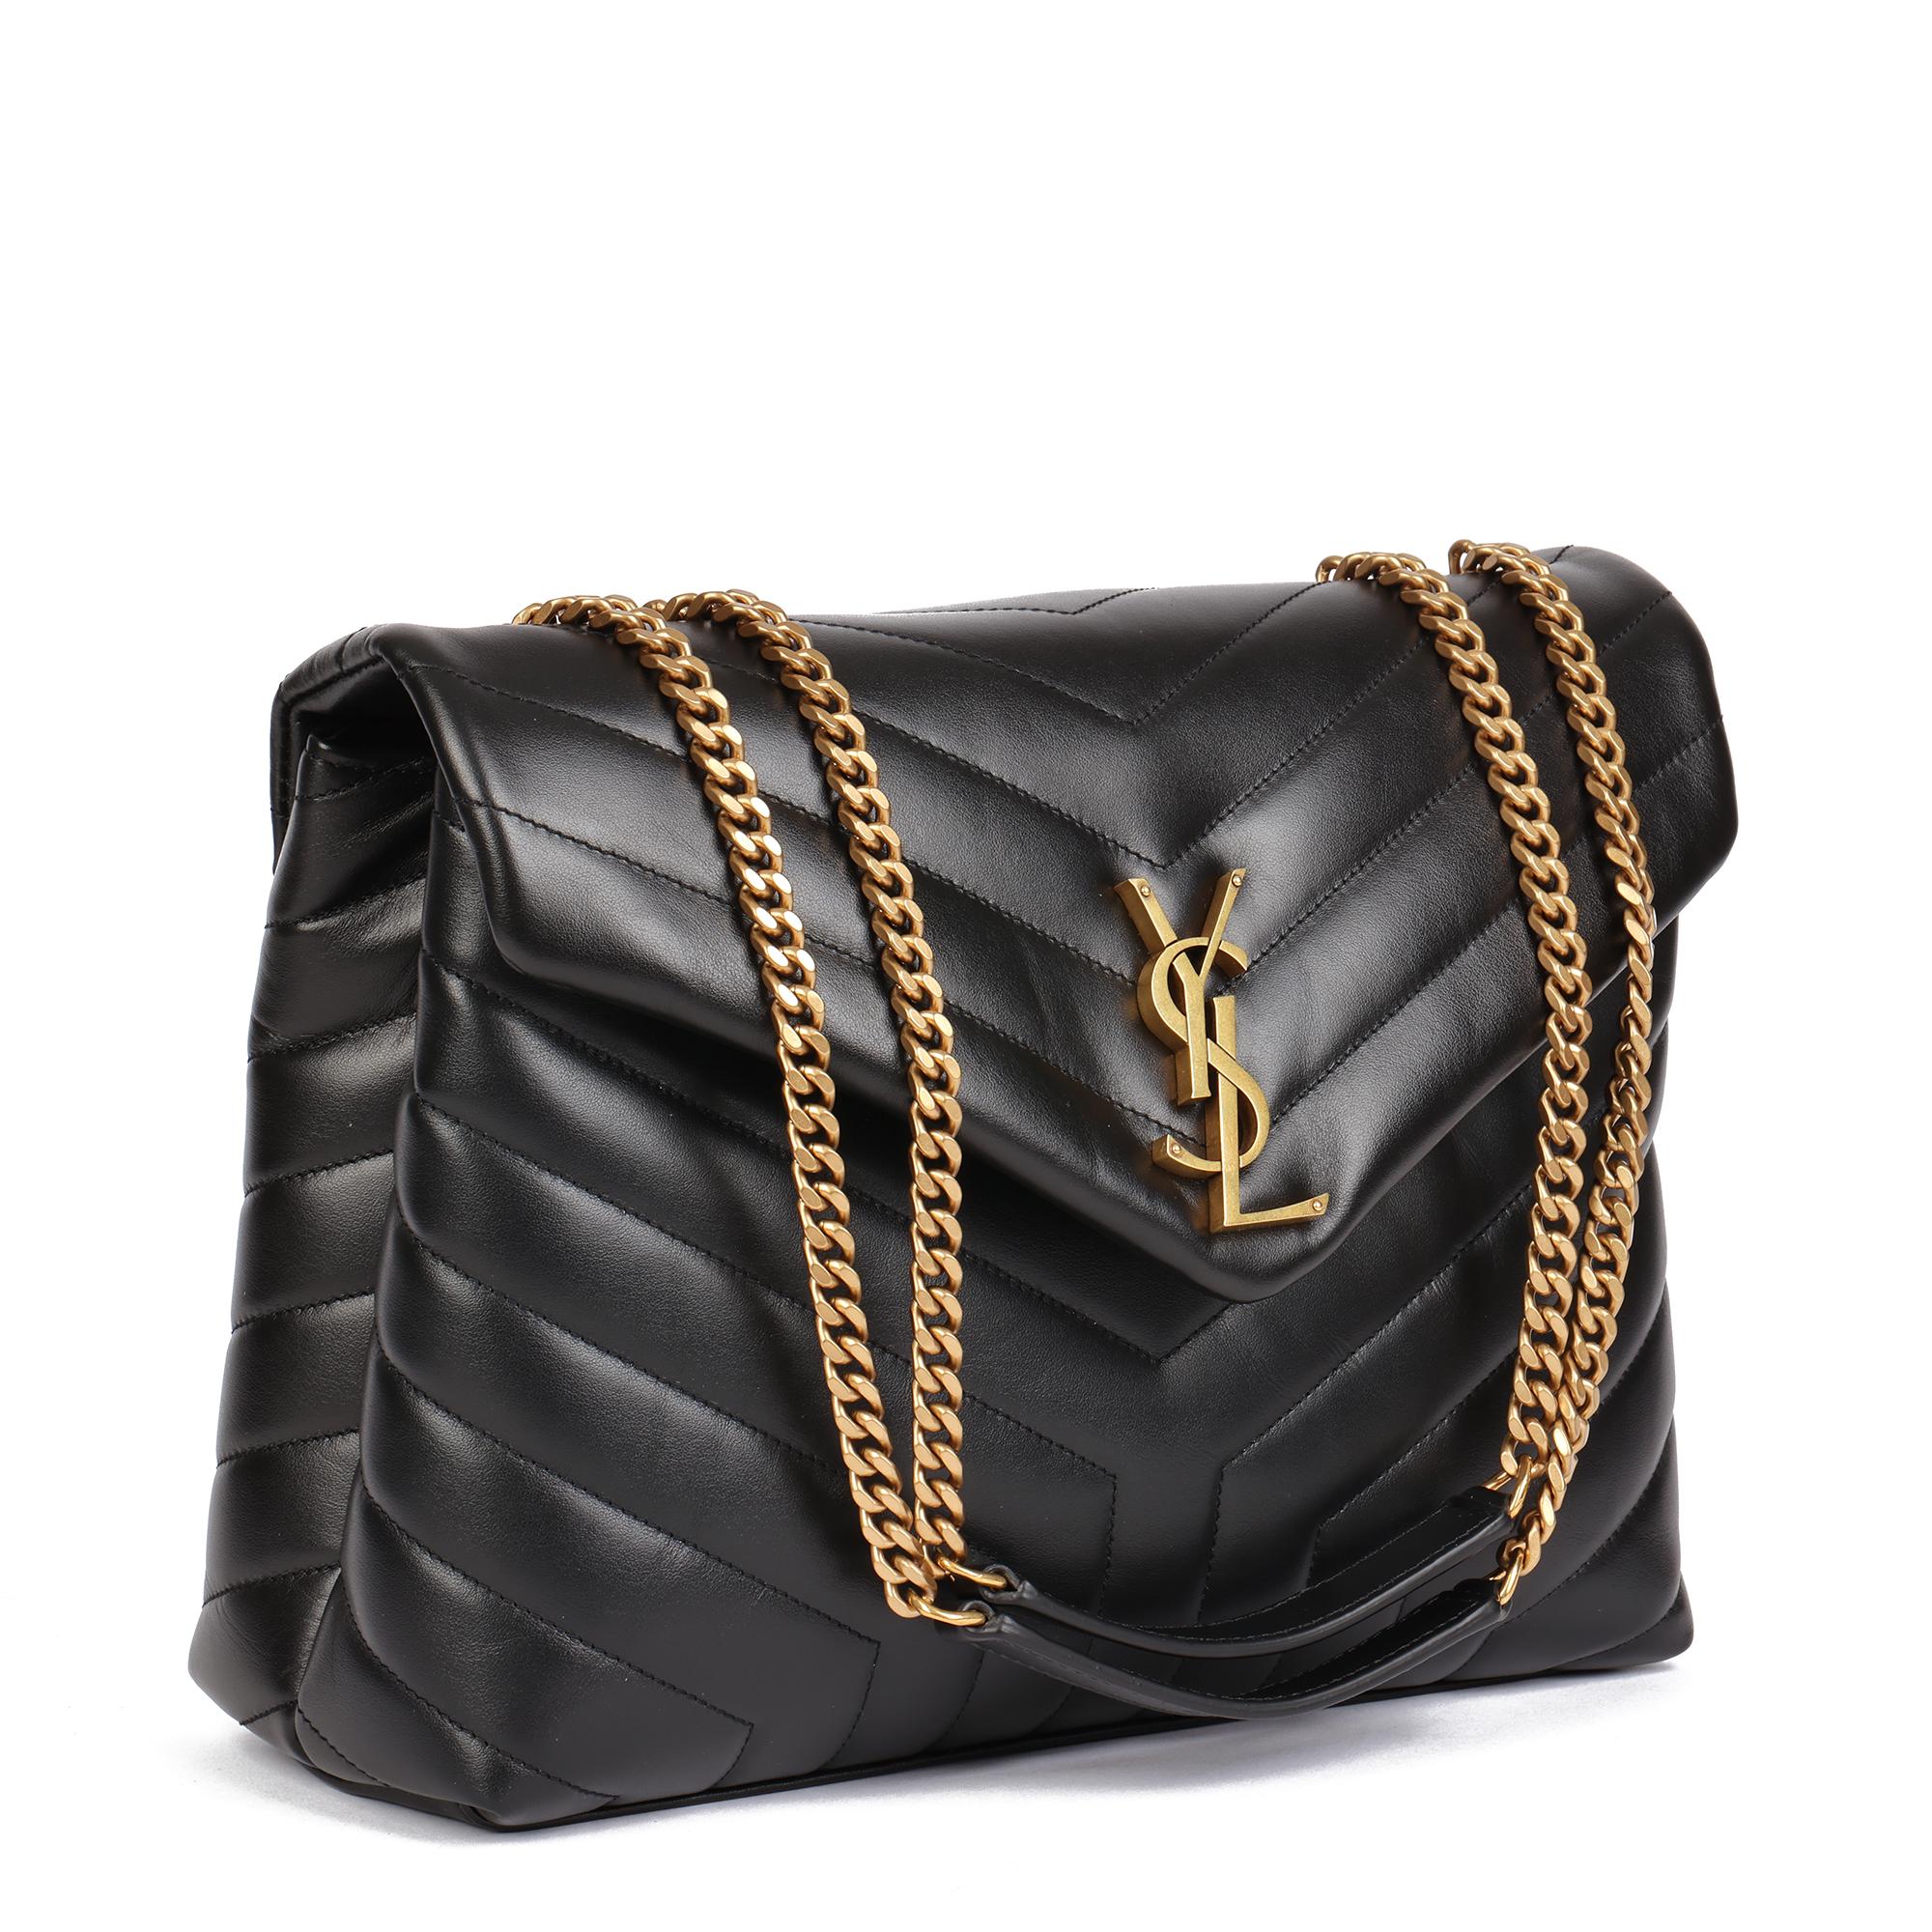 SAINT LAURENT
Black Y Quilted Calfskin Leather Medium Loulou

Xupes Reference: HB4635
Serial Number: TCT574946.0120
Age (Circa): 2022
Accompanied By: Saint Laurent Dust Bag, Care Booklet
Authenticity Details: Date Stamp (Made in Italy)
Gender: